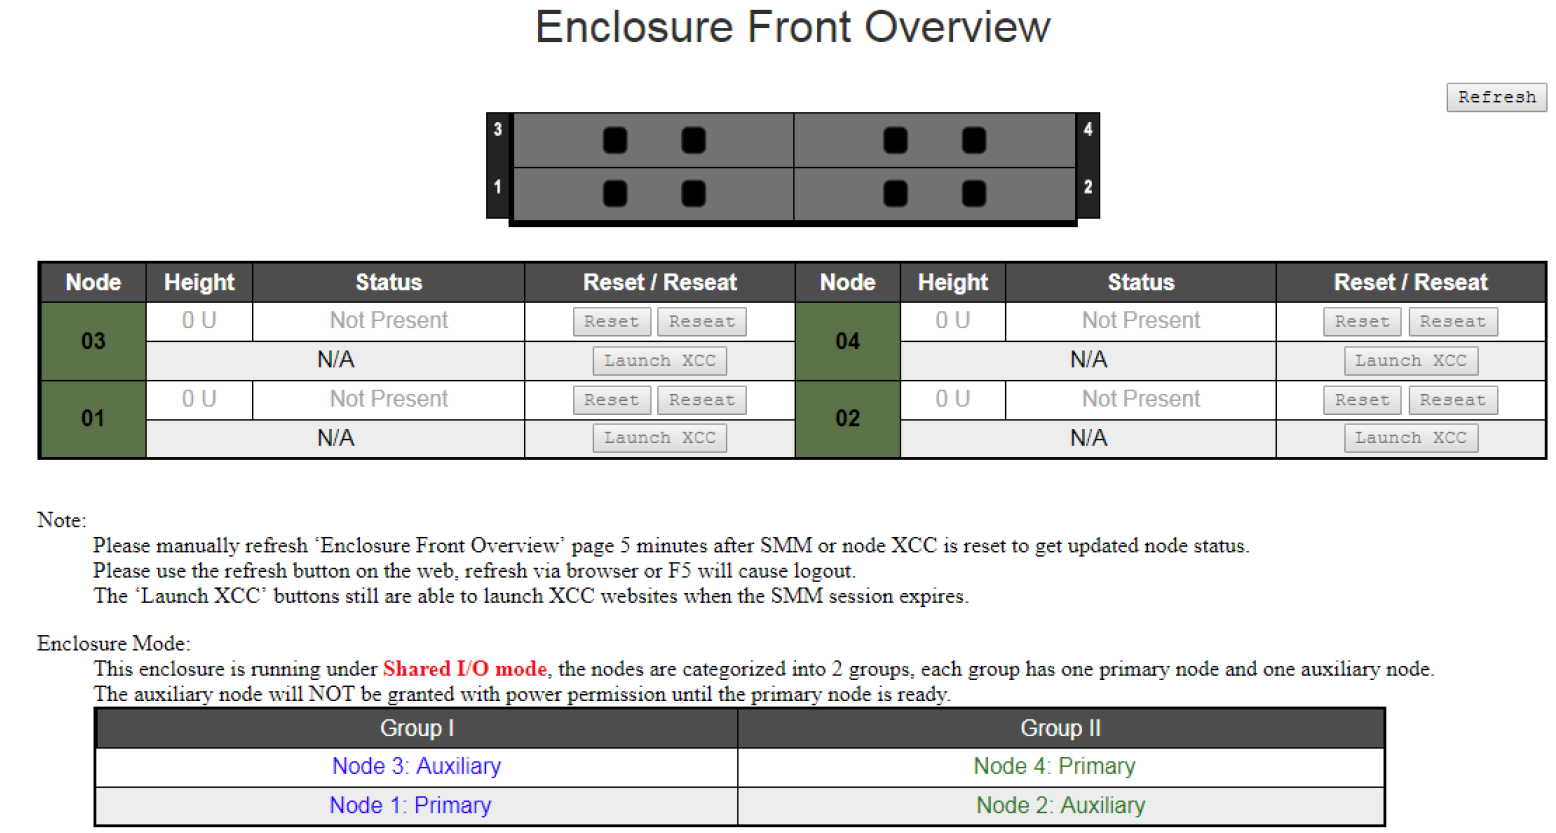 Enclosure front overview with shared PCIe dual adapters